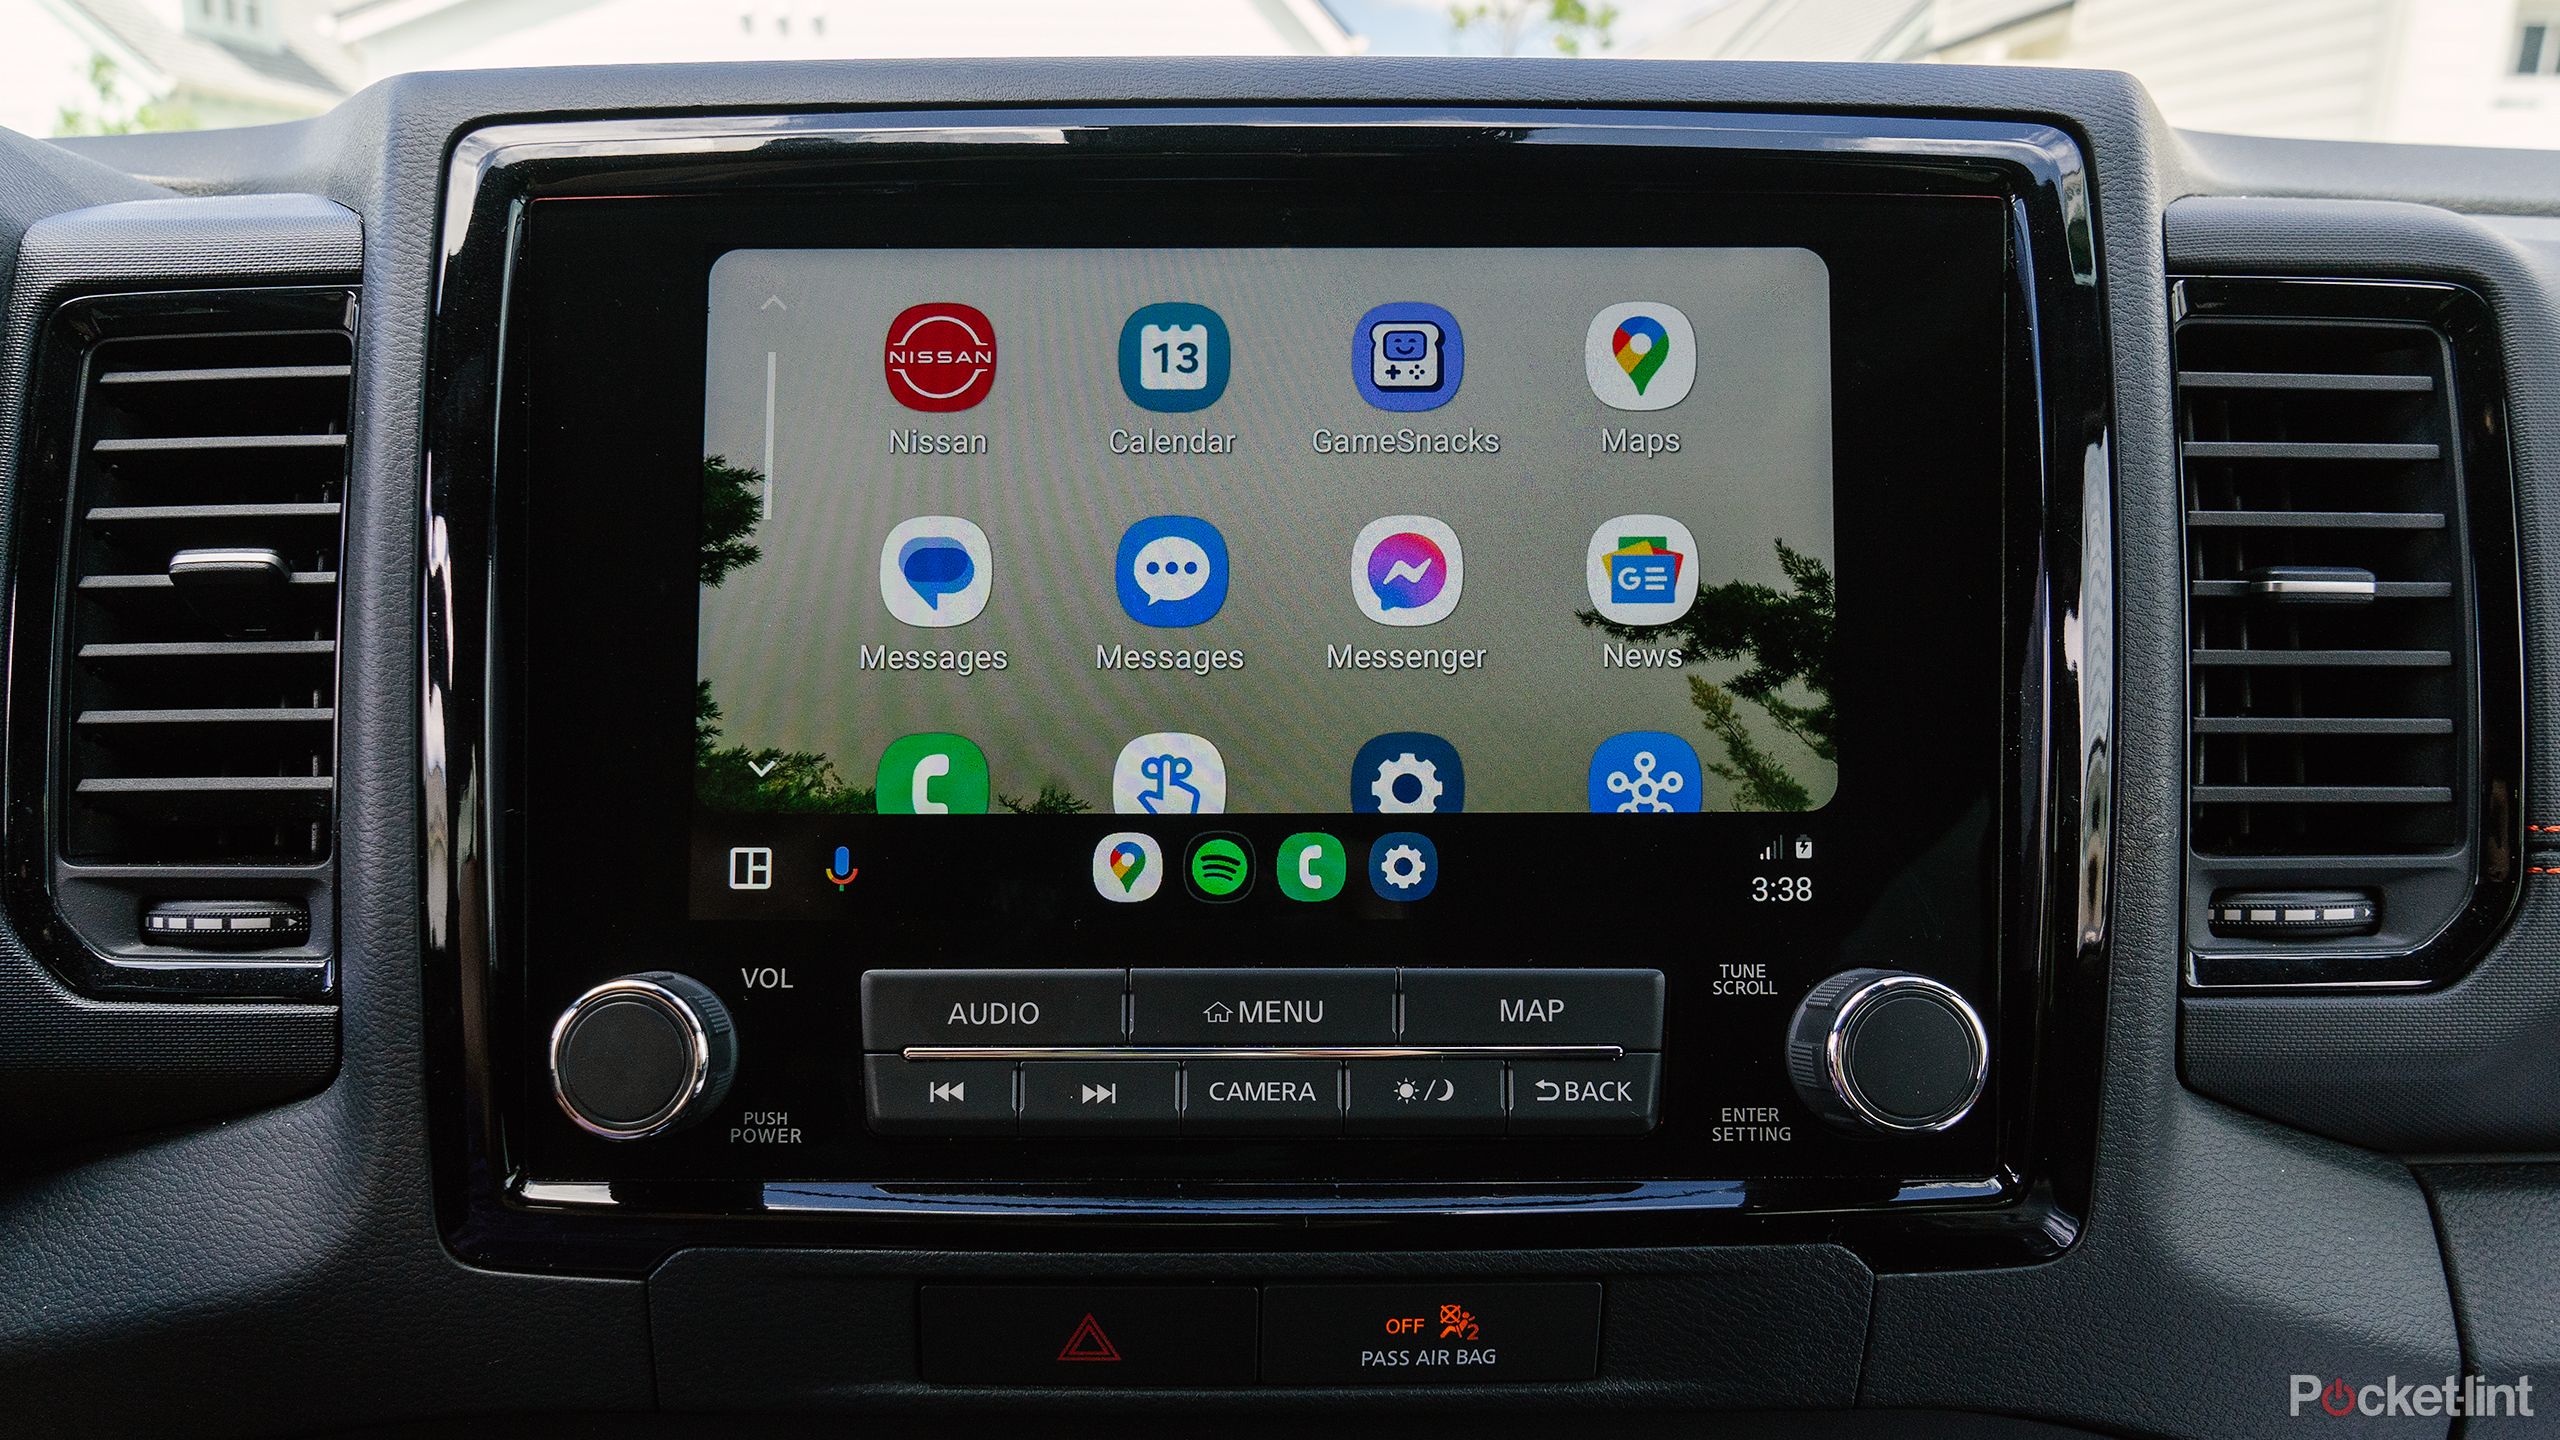 A display shows Android Auto